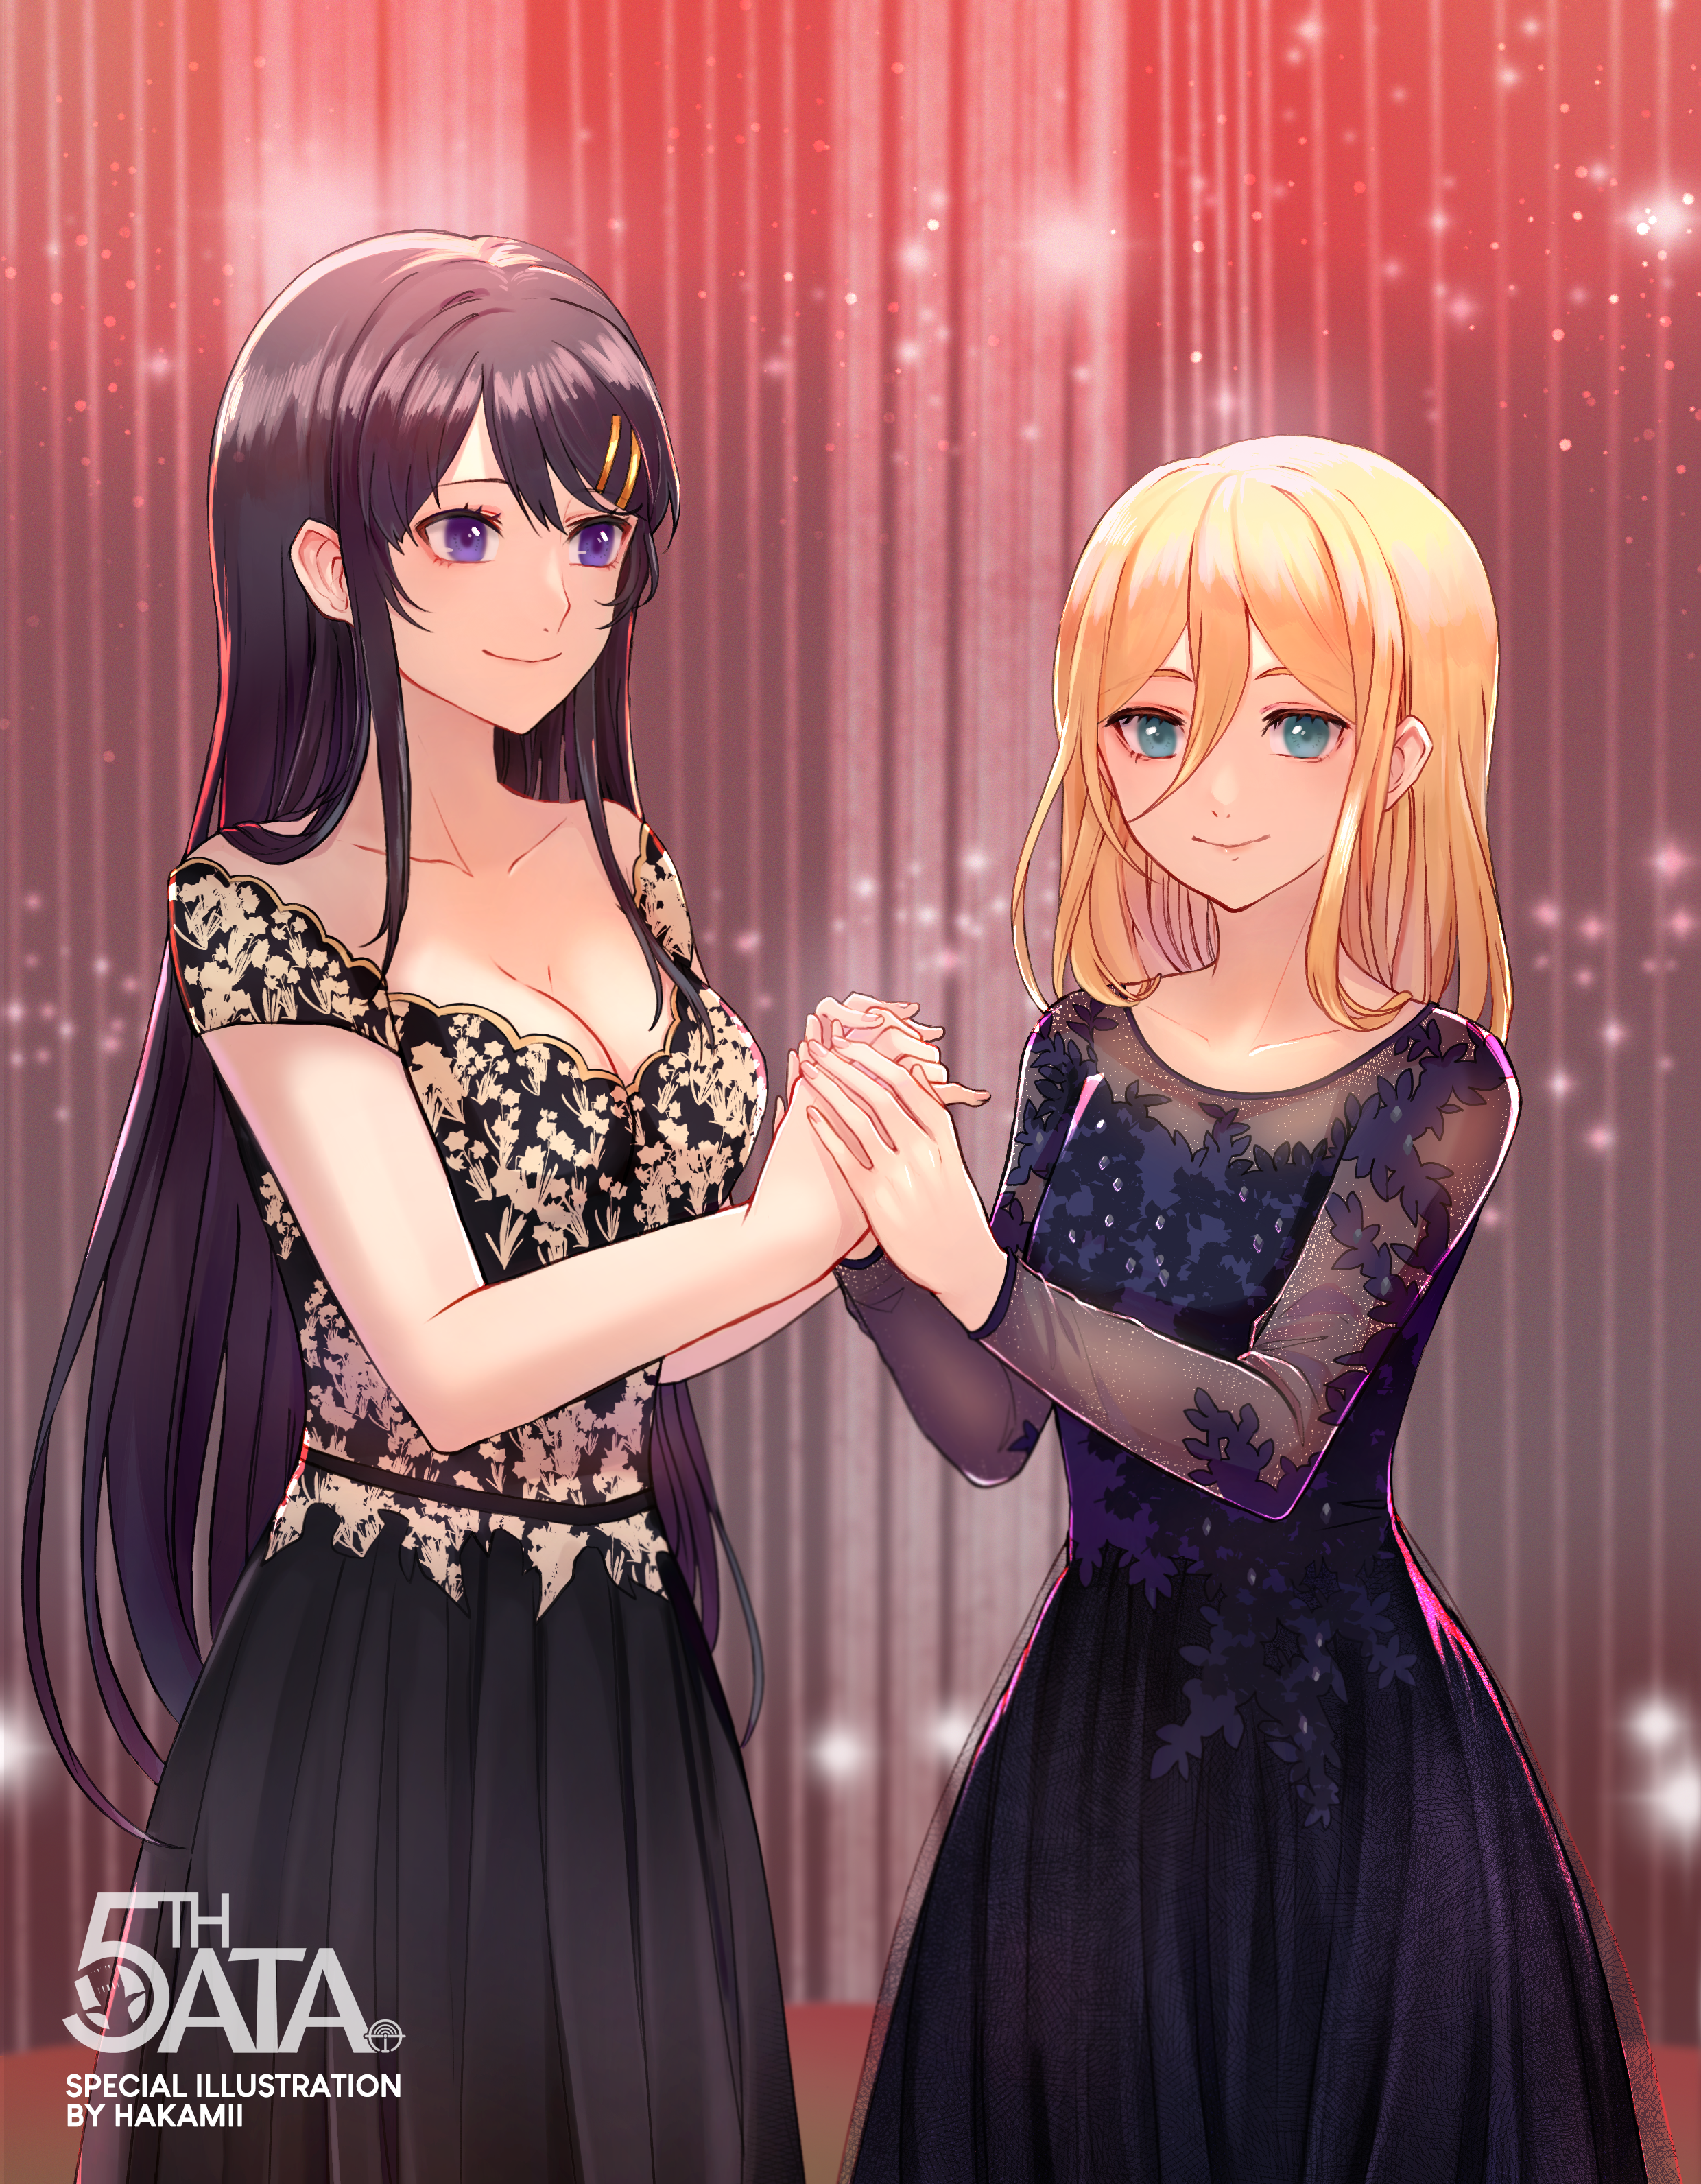 Final 2 Girl of the Year for 5th Anime Trending Awards